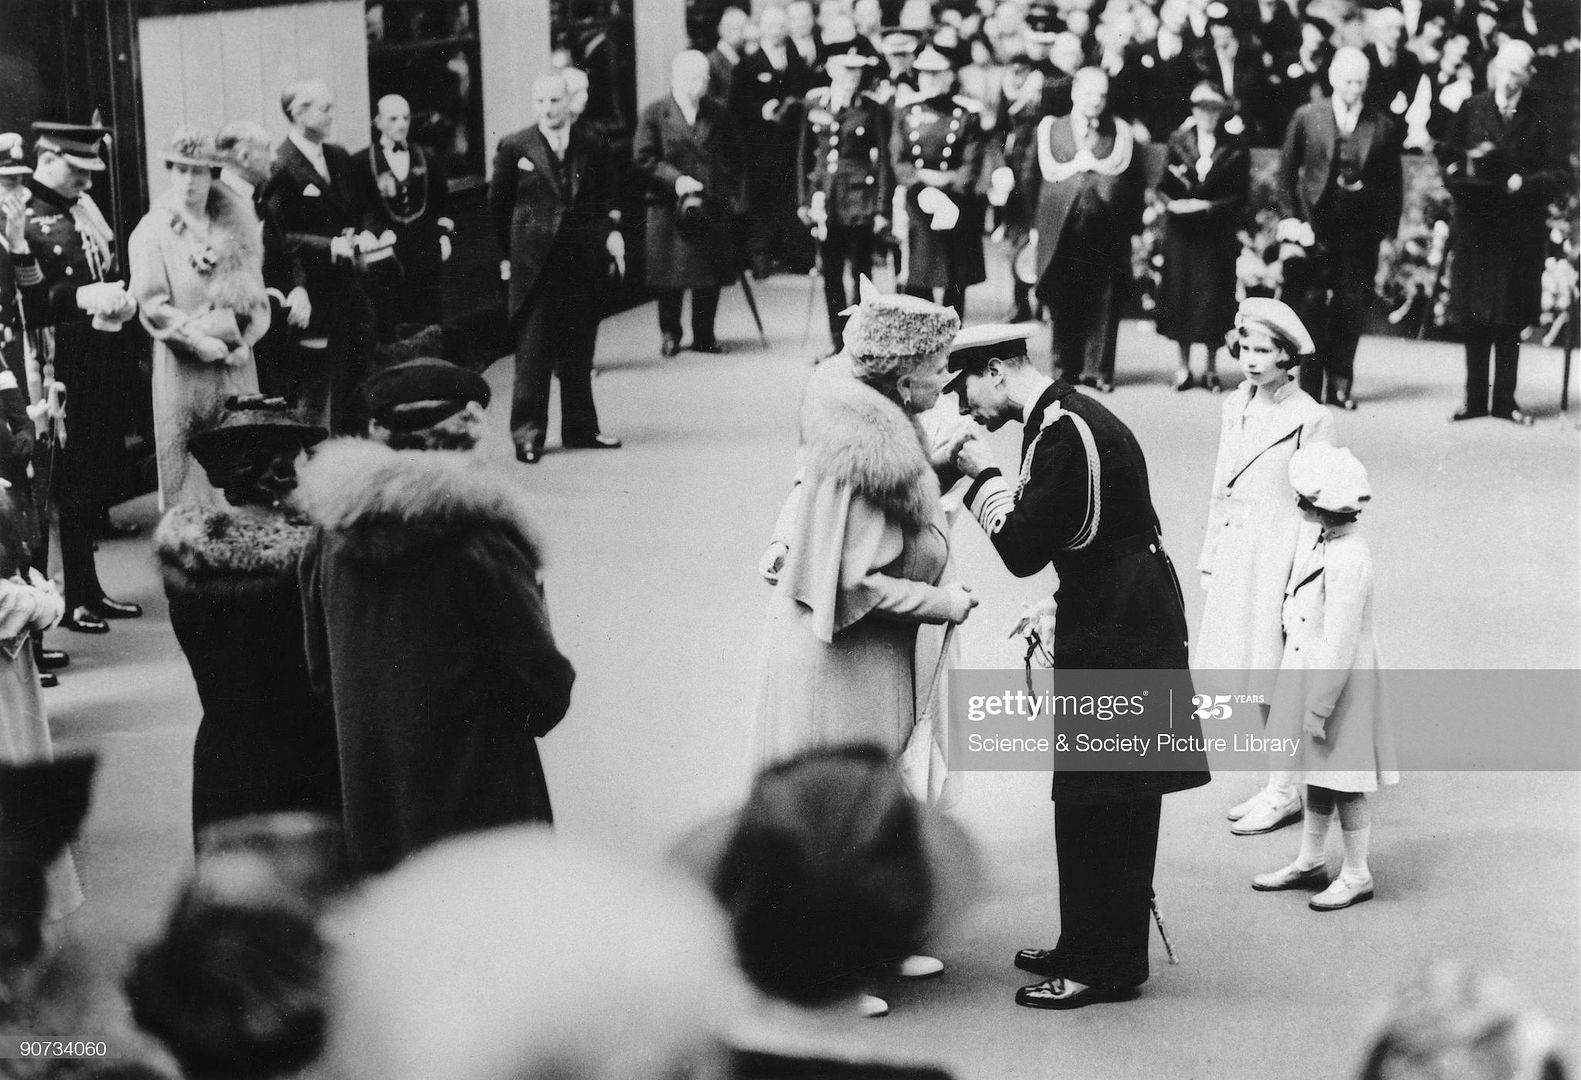 1939_May_departure_brooch_faint._One_of_these_photos_is_flipped._gettyimages_90734060_2048x2048